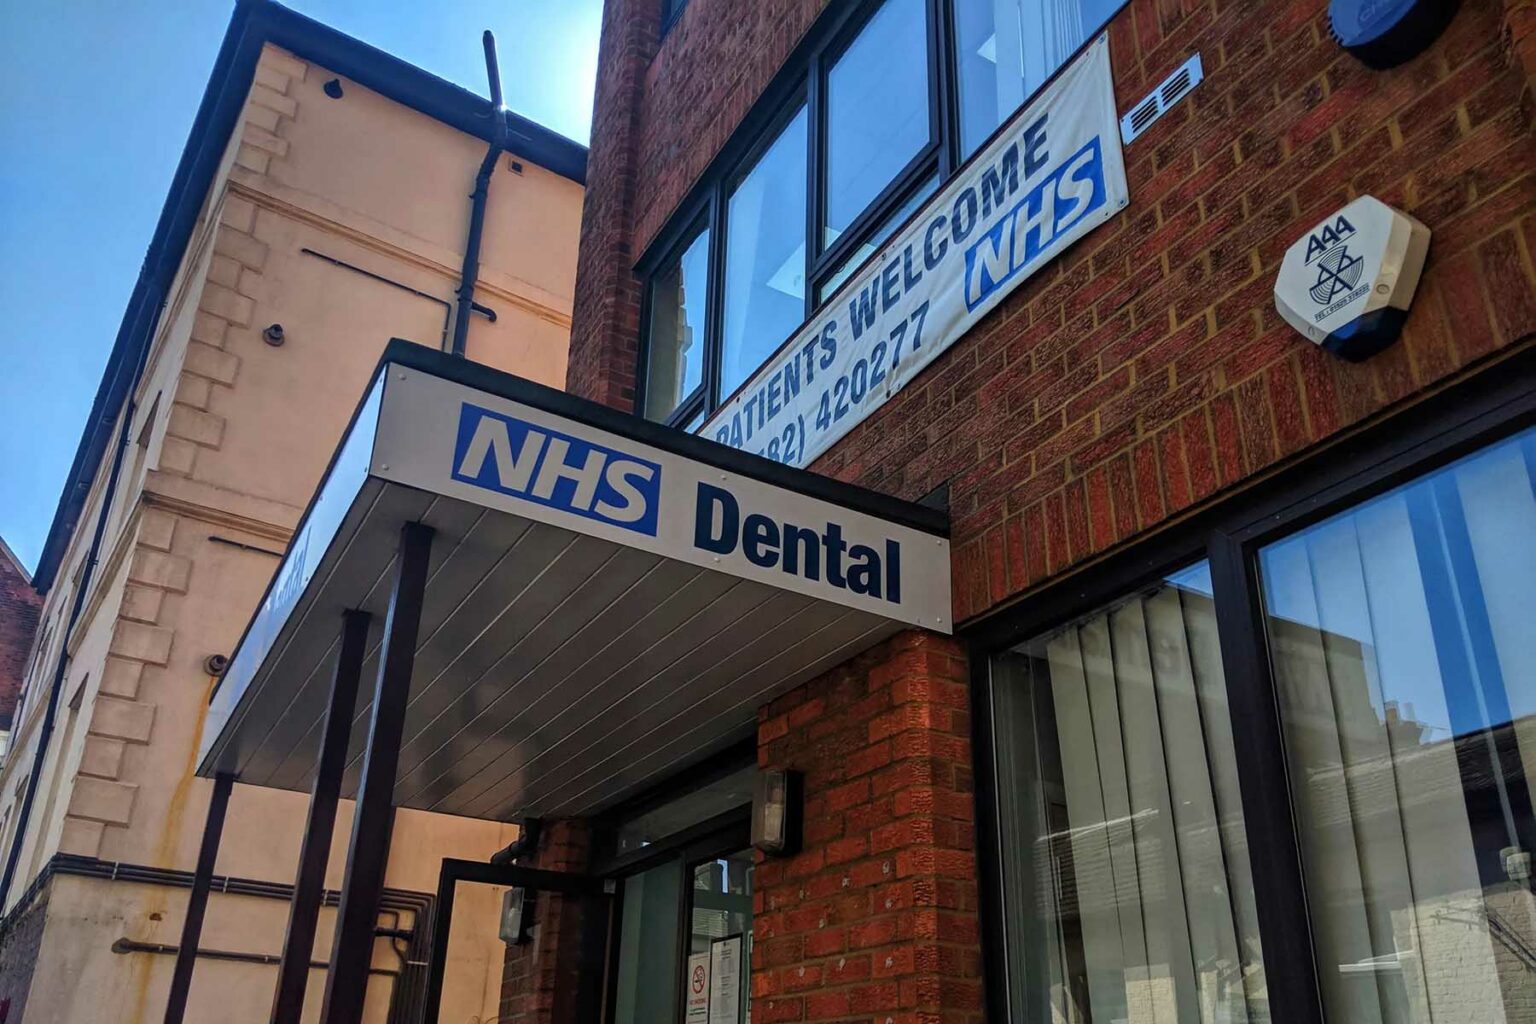 Sign of an NHS dentist, somewhere in the UK